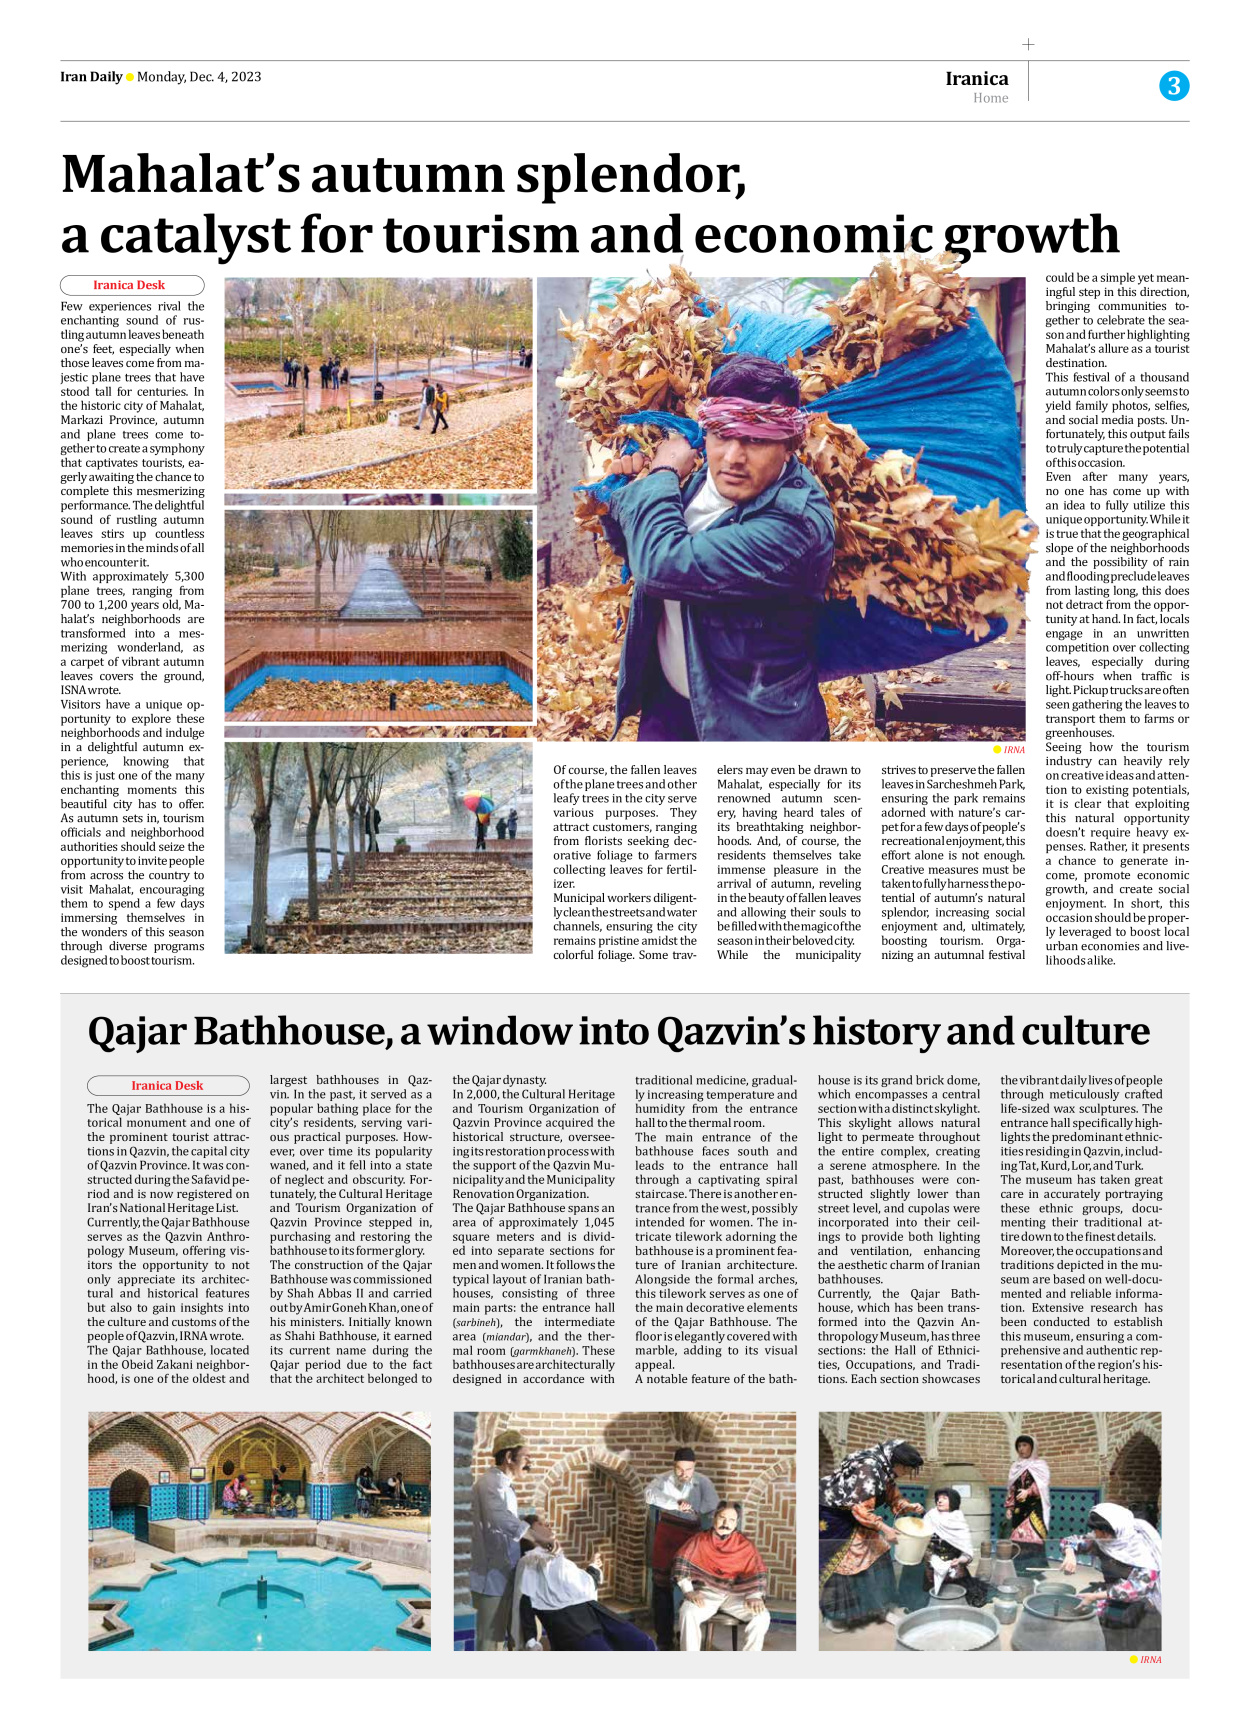 Iran Daily - Number Seven Thousand Four Hundred and Fifty One - 04 December 2023 - Page 3